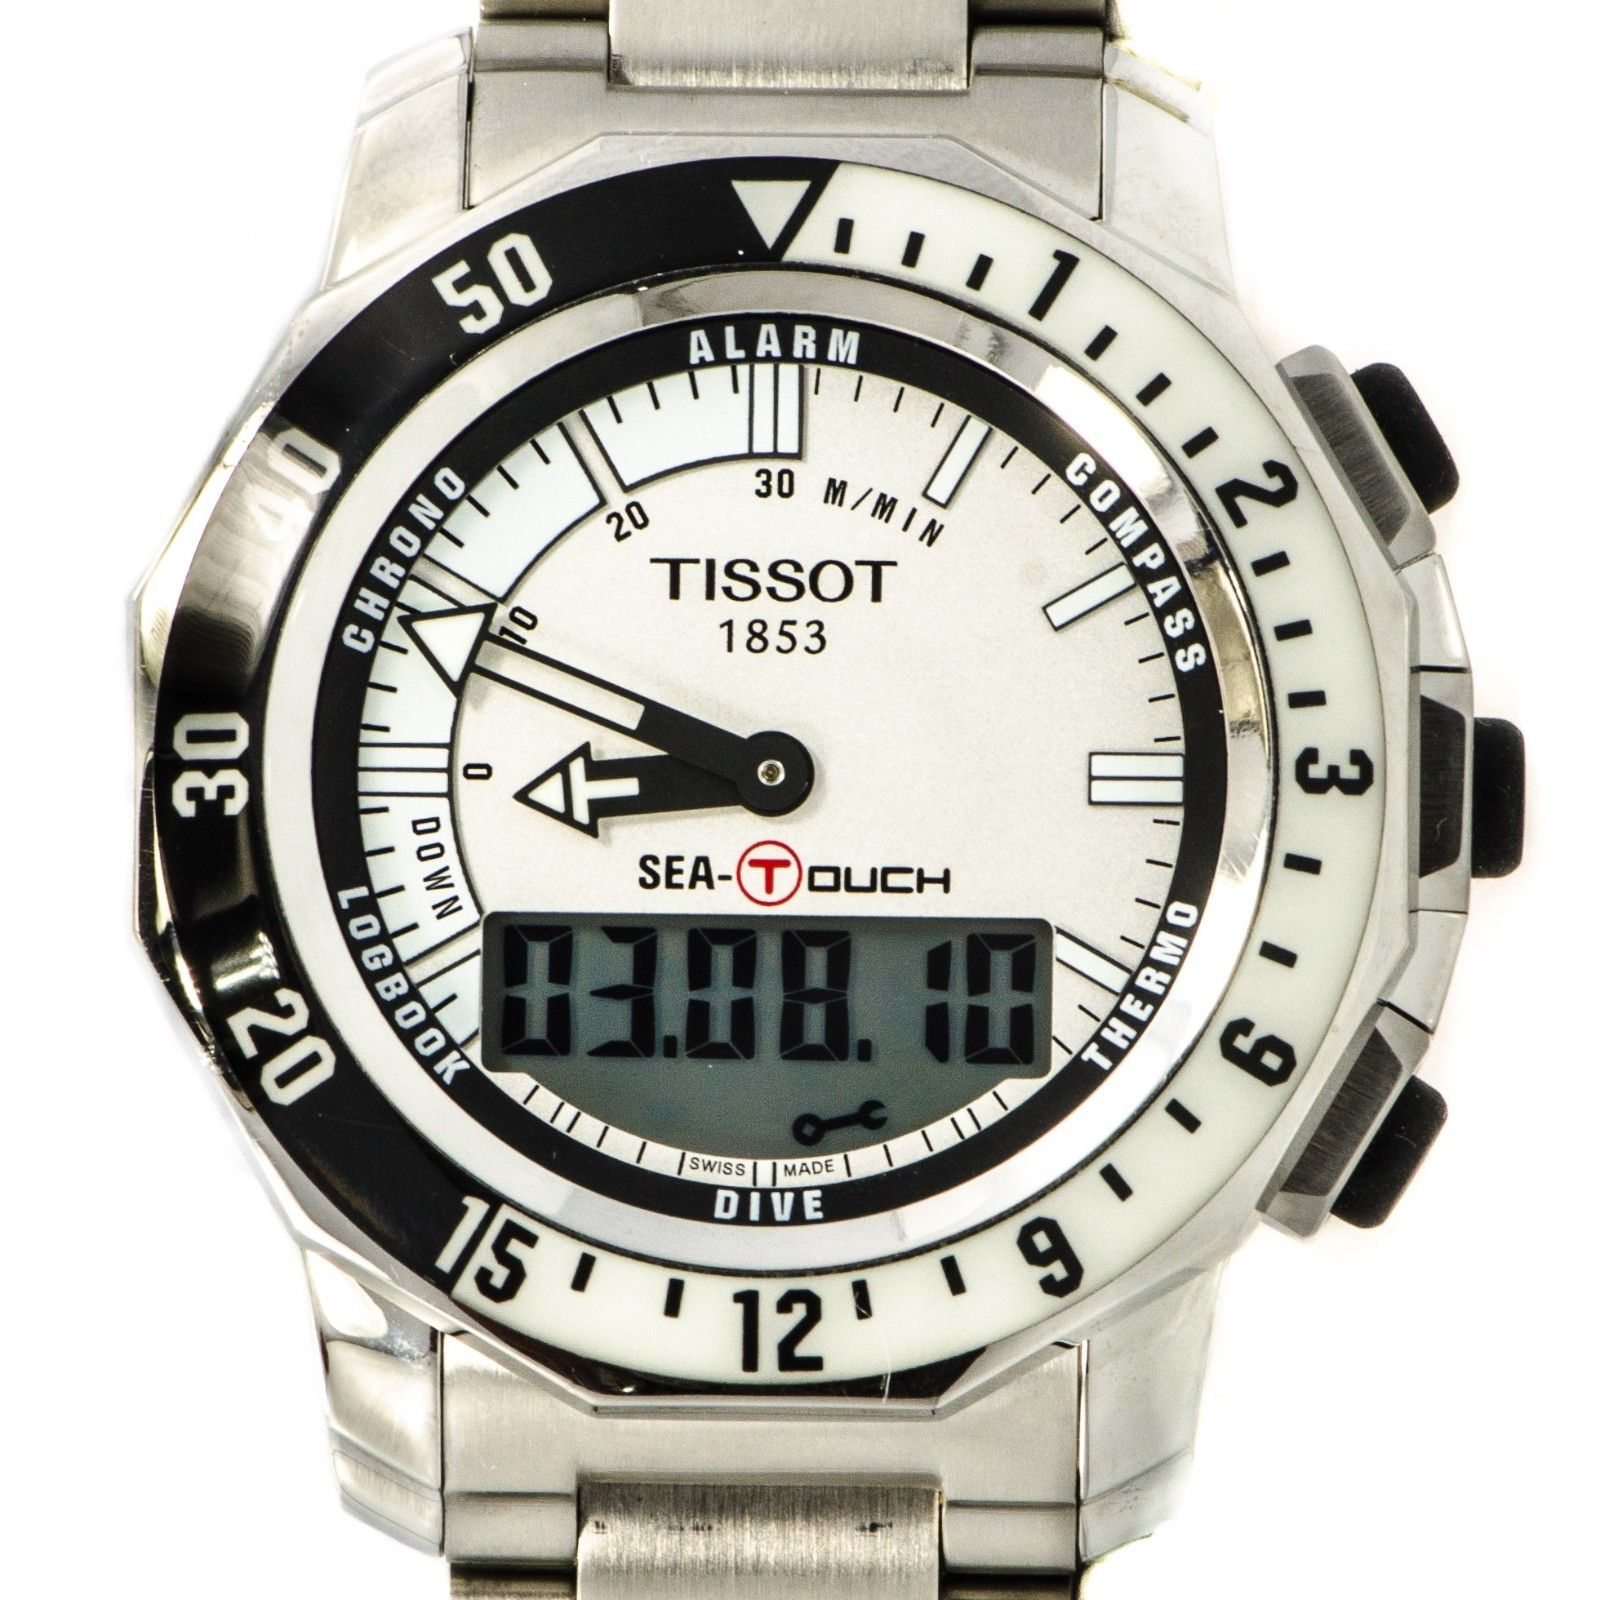 Image of Tissot T026420A Stainless Steel White Dial Alarm Compass Digital Men's Watch